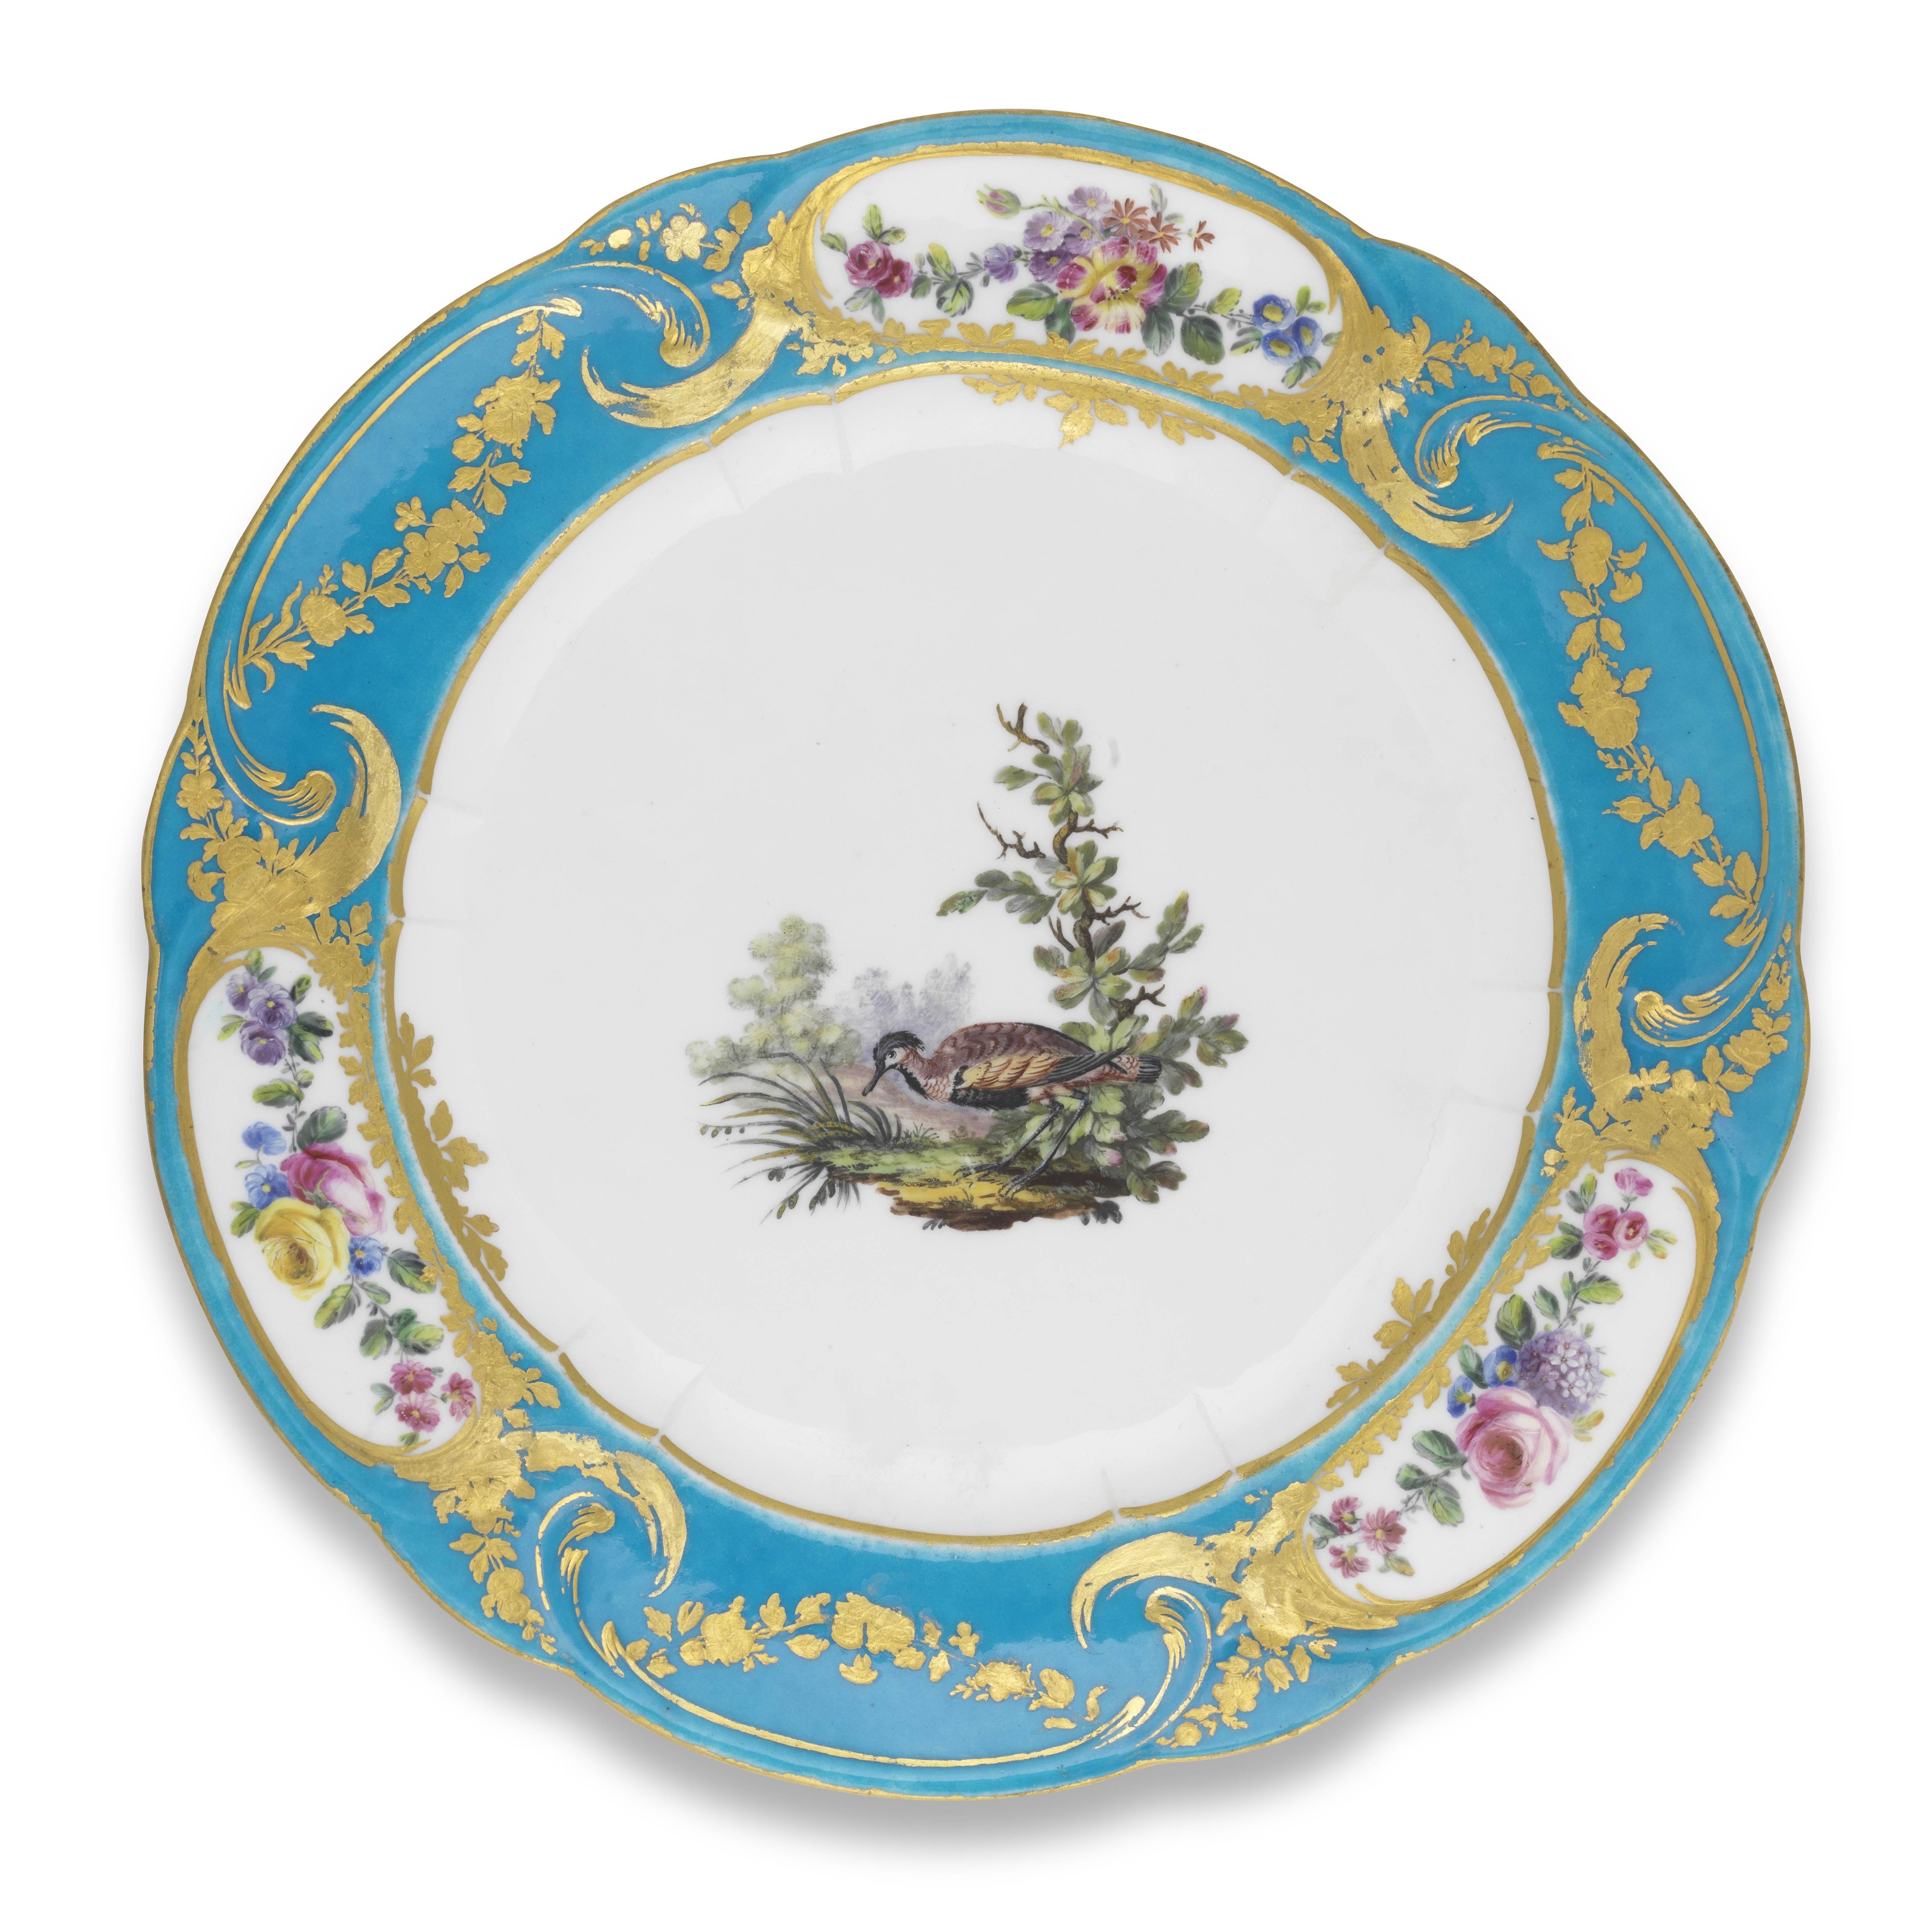 A S&#232;vres bleu c&#233;leste-ground plate from the service for the baron de Breteuil, dated 1768